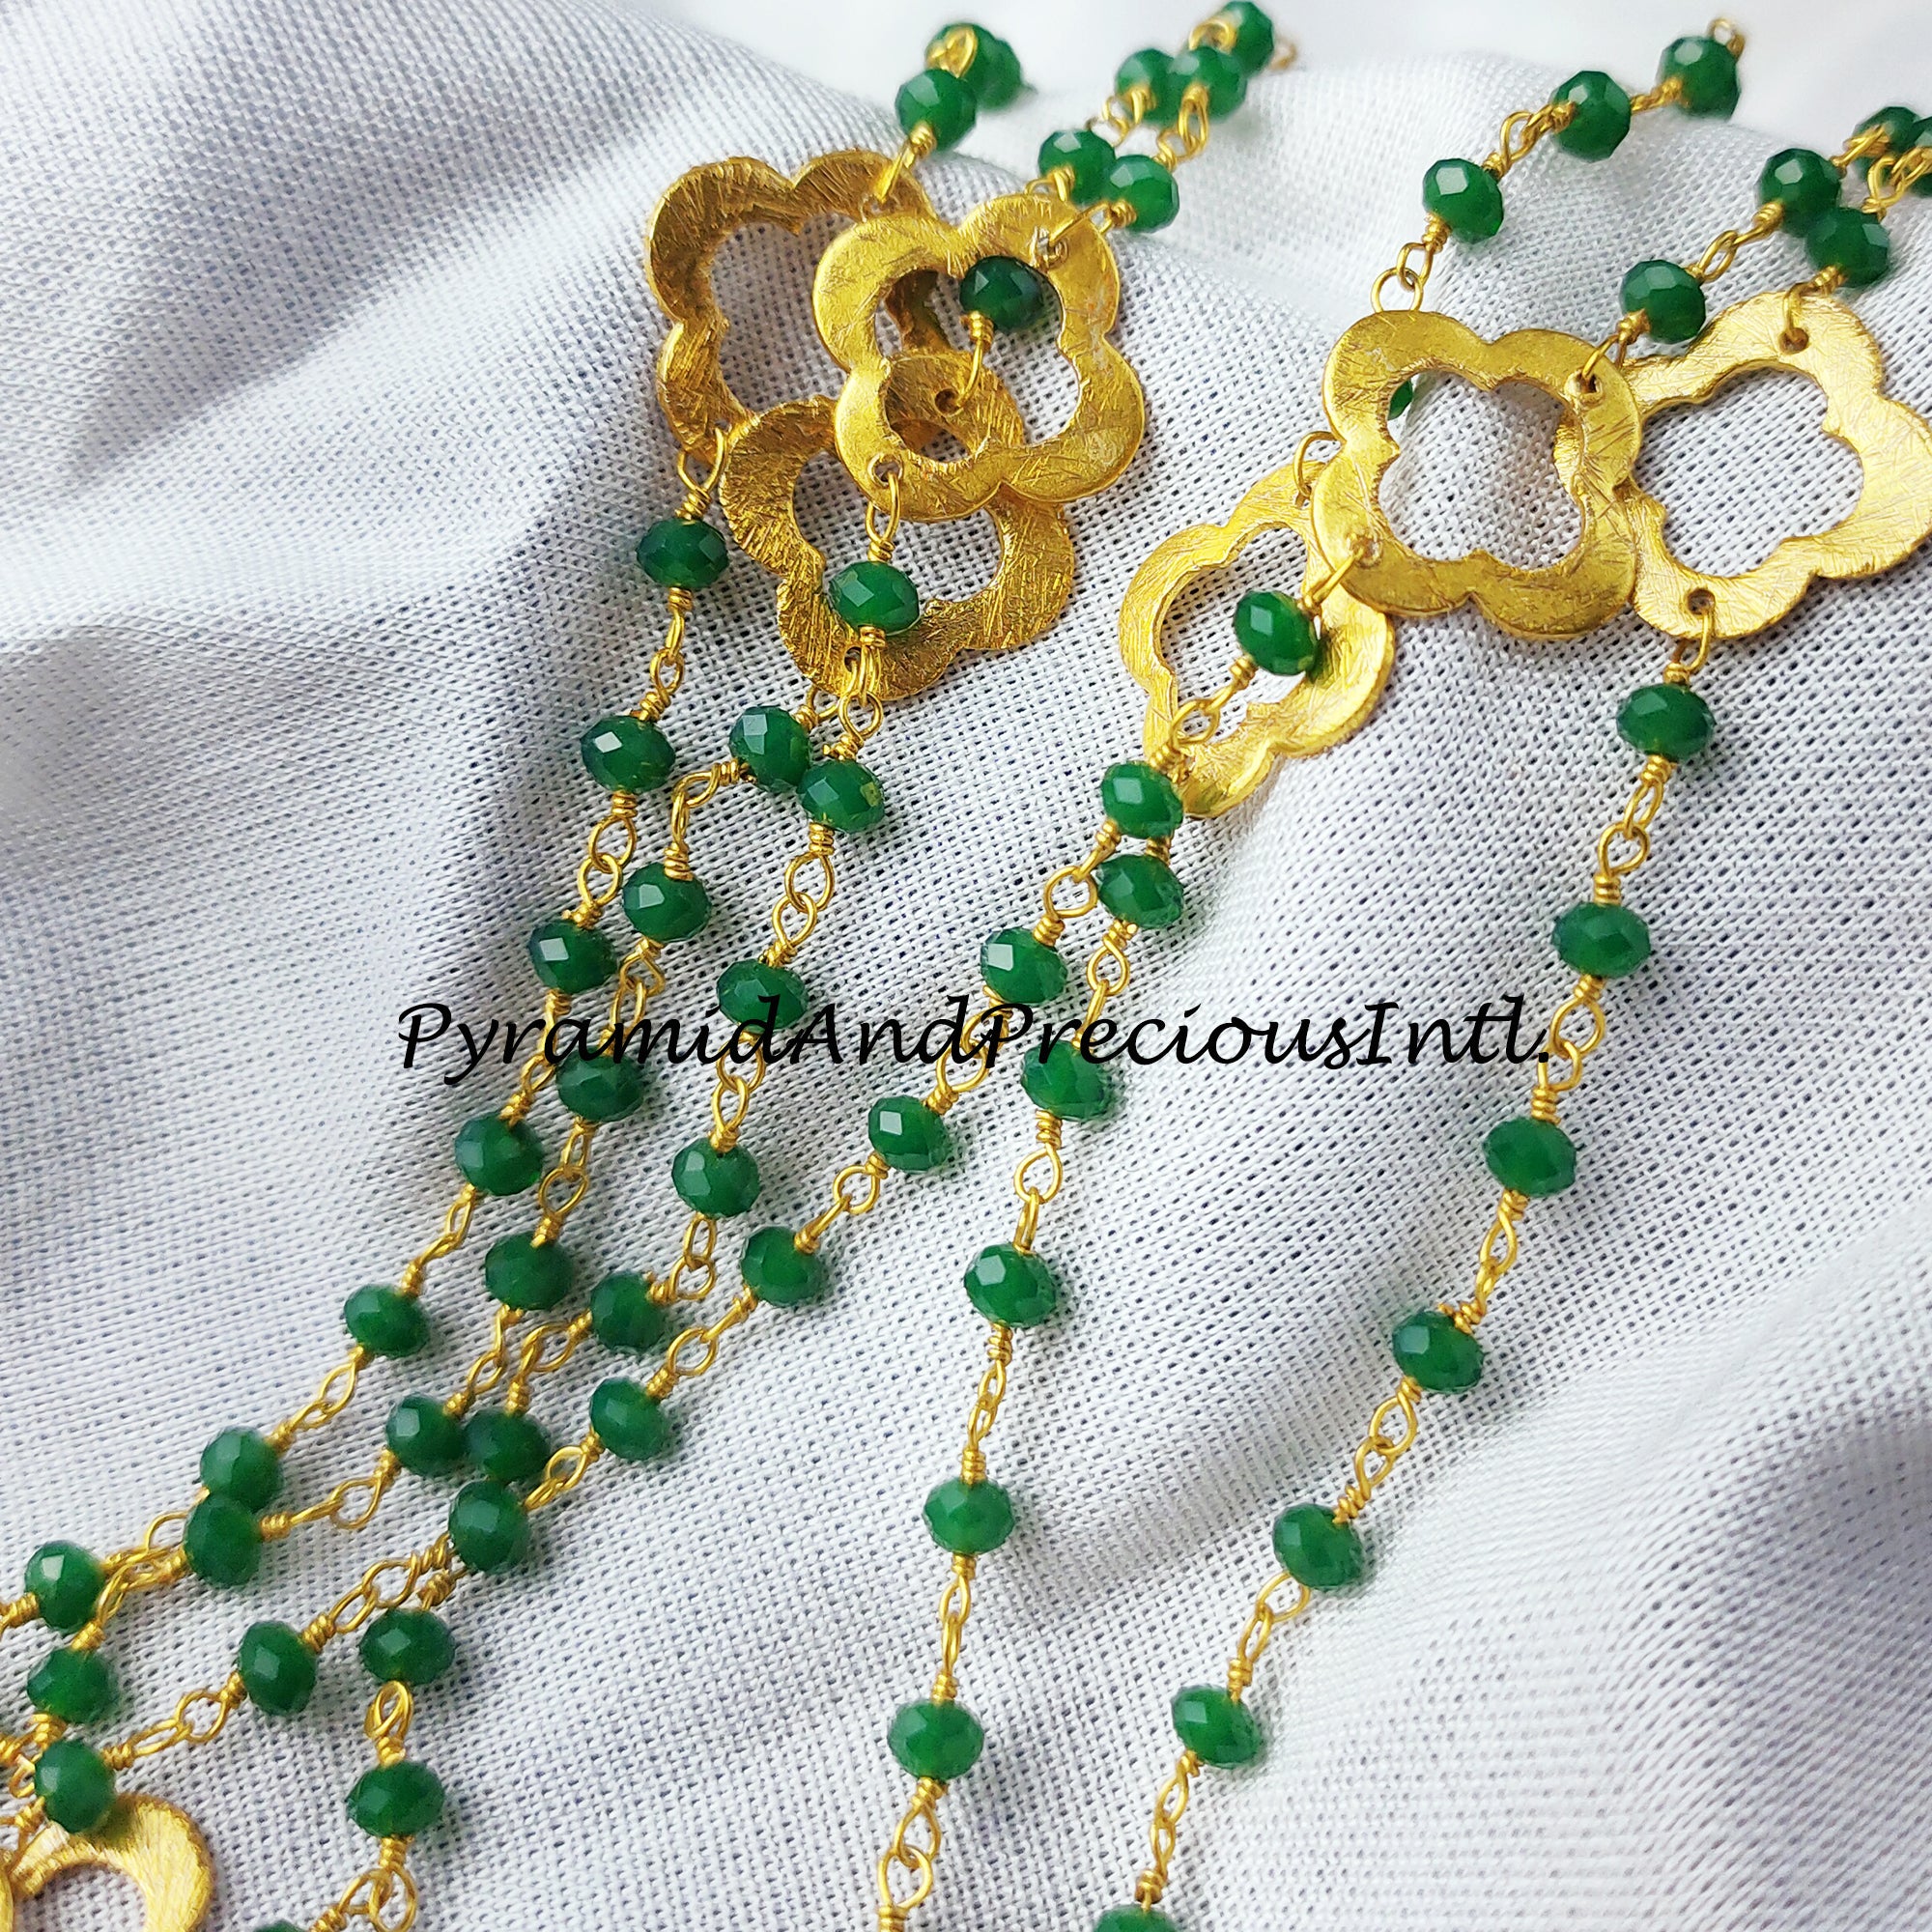 Green Onyx Beaded Chain, Wire Wrapped Chain, Rosary Bead Chain, Green Gemstone Chain, Jewelry Making Chain – SELLING BY FOOT